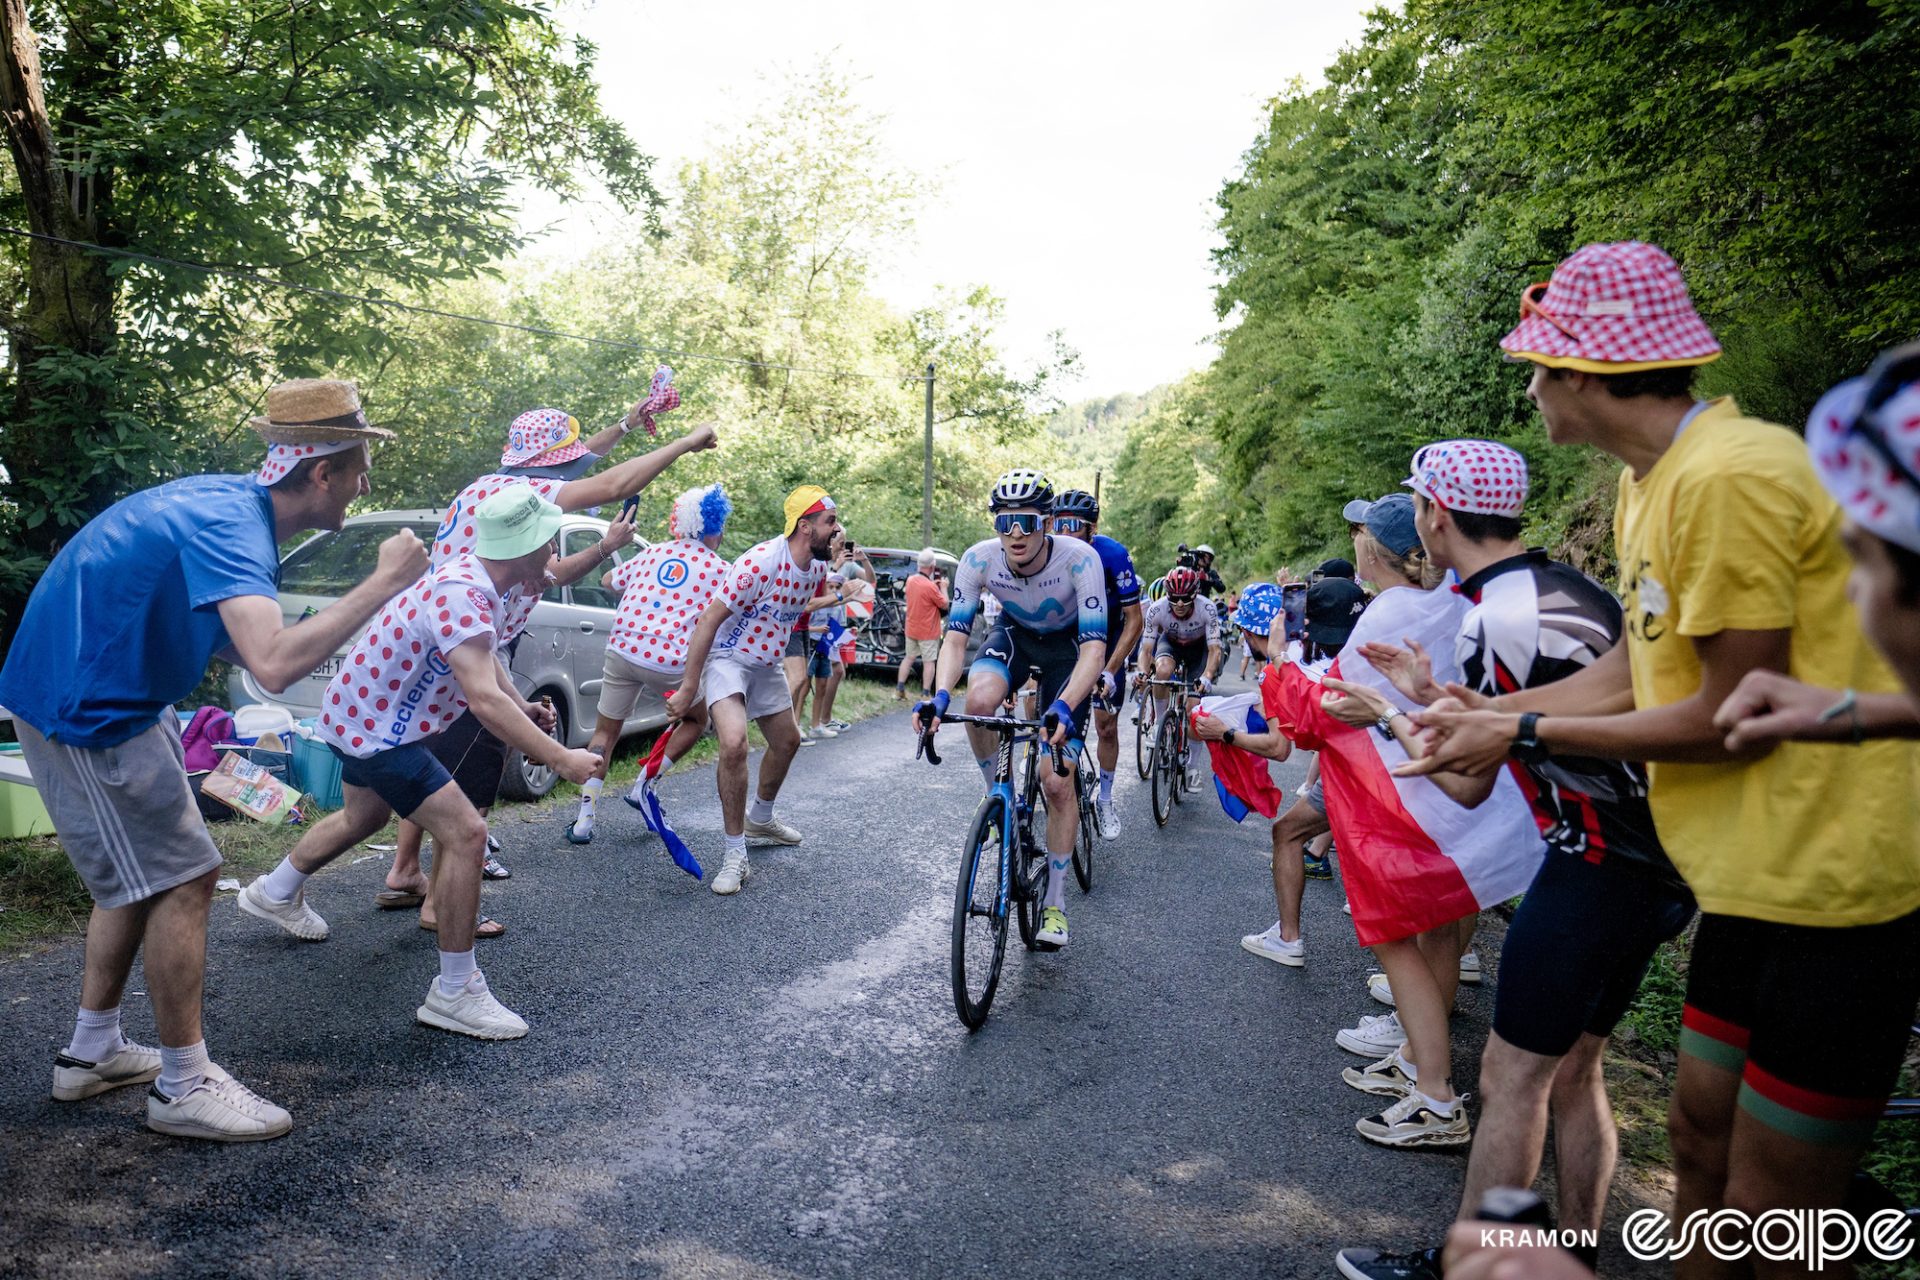 Matteo Jorgenson leads the breakaway on stage 12 of the 2023 Tour de France. He's climbing up a narrow road as fans, many dressed in polka-dot shirts and hats from the publicity caravan, lean in and cheer.